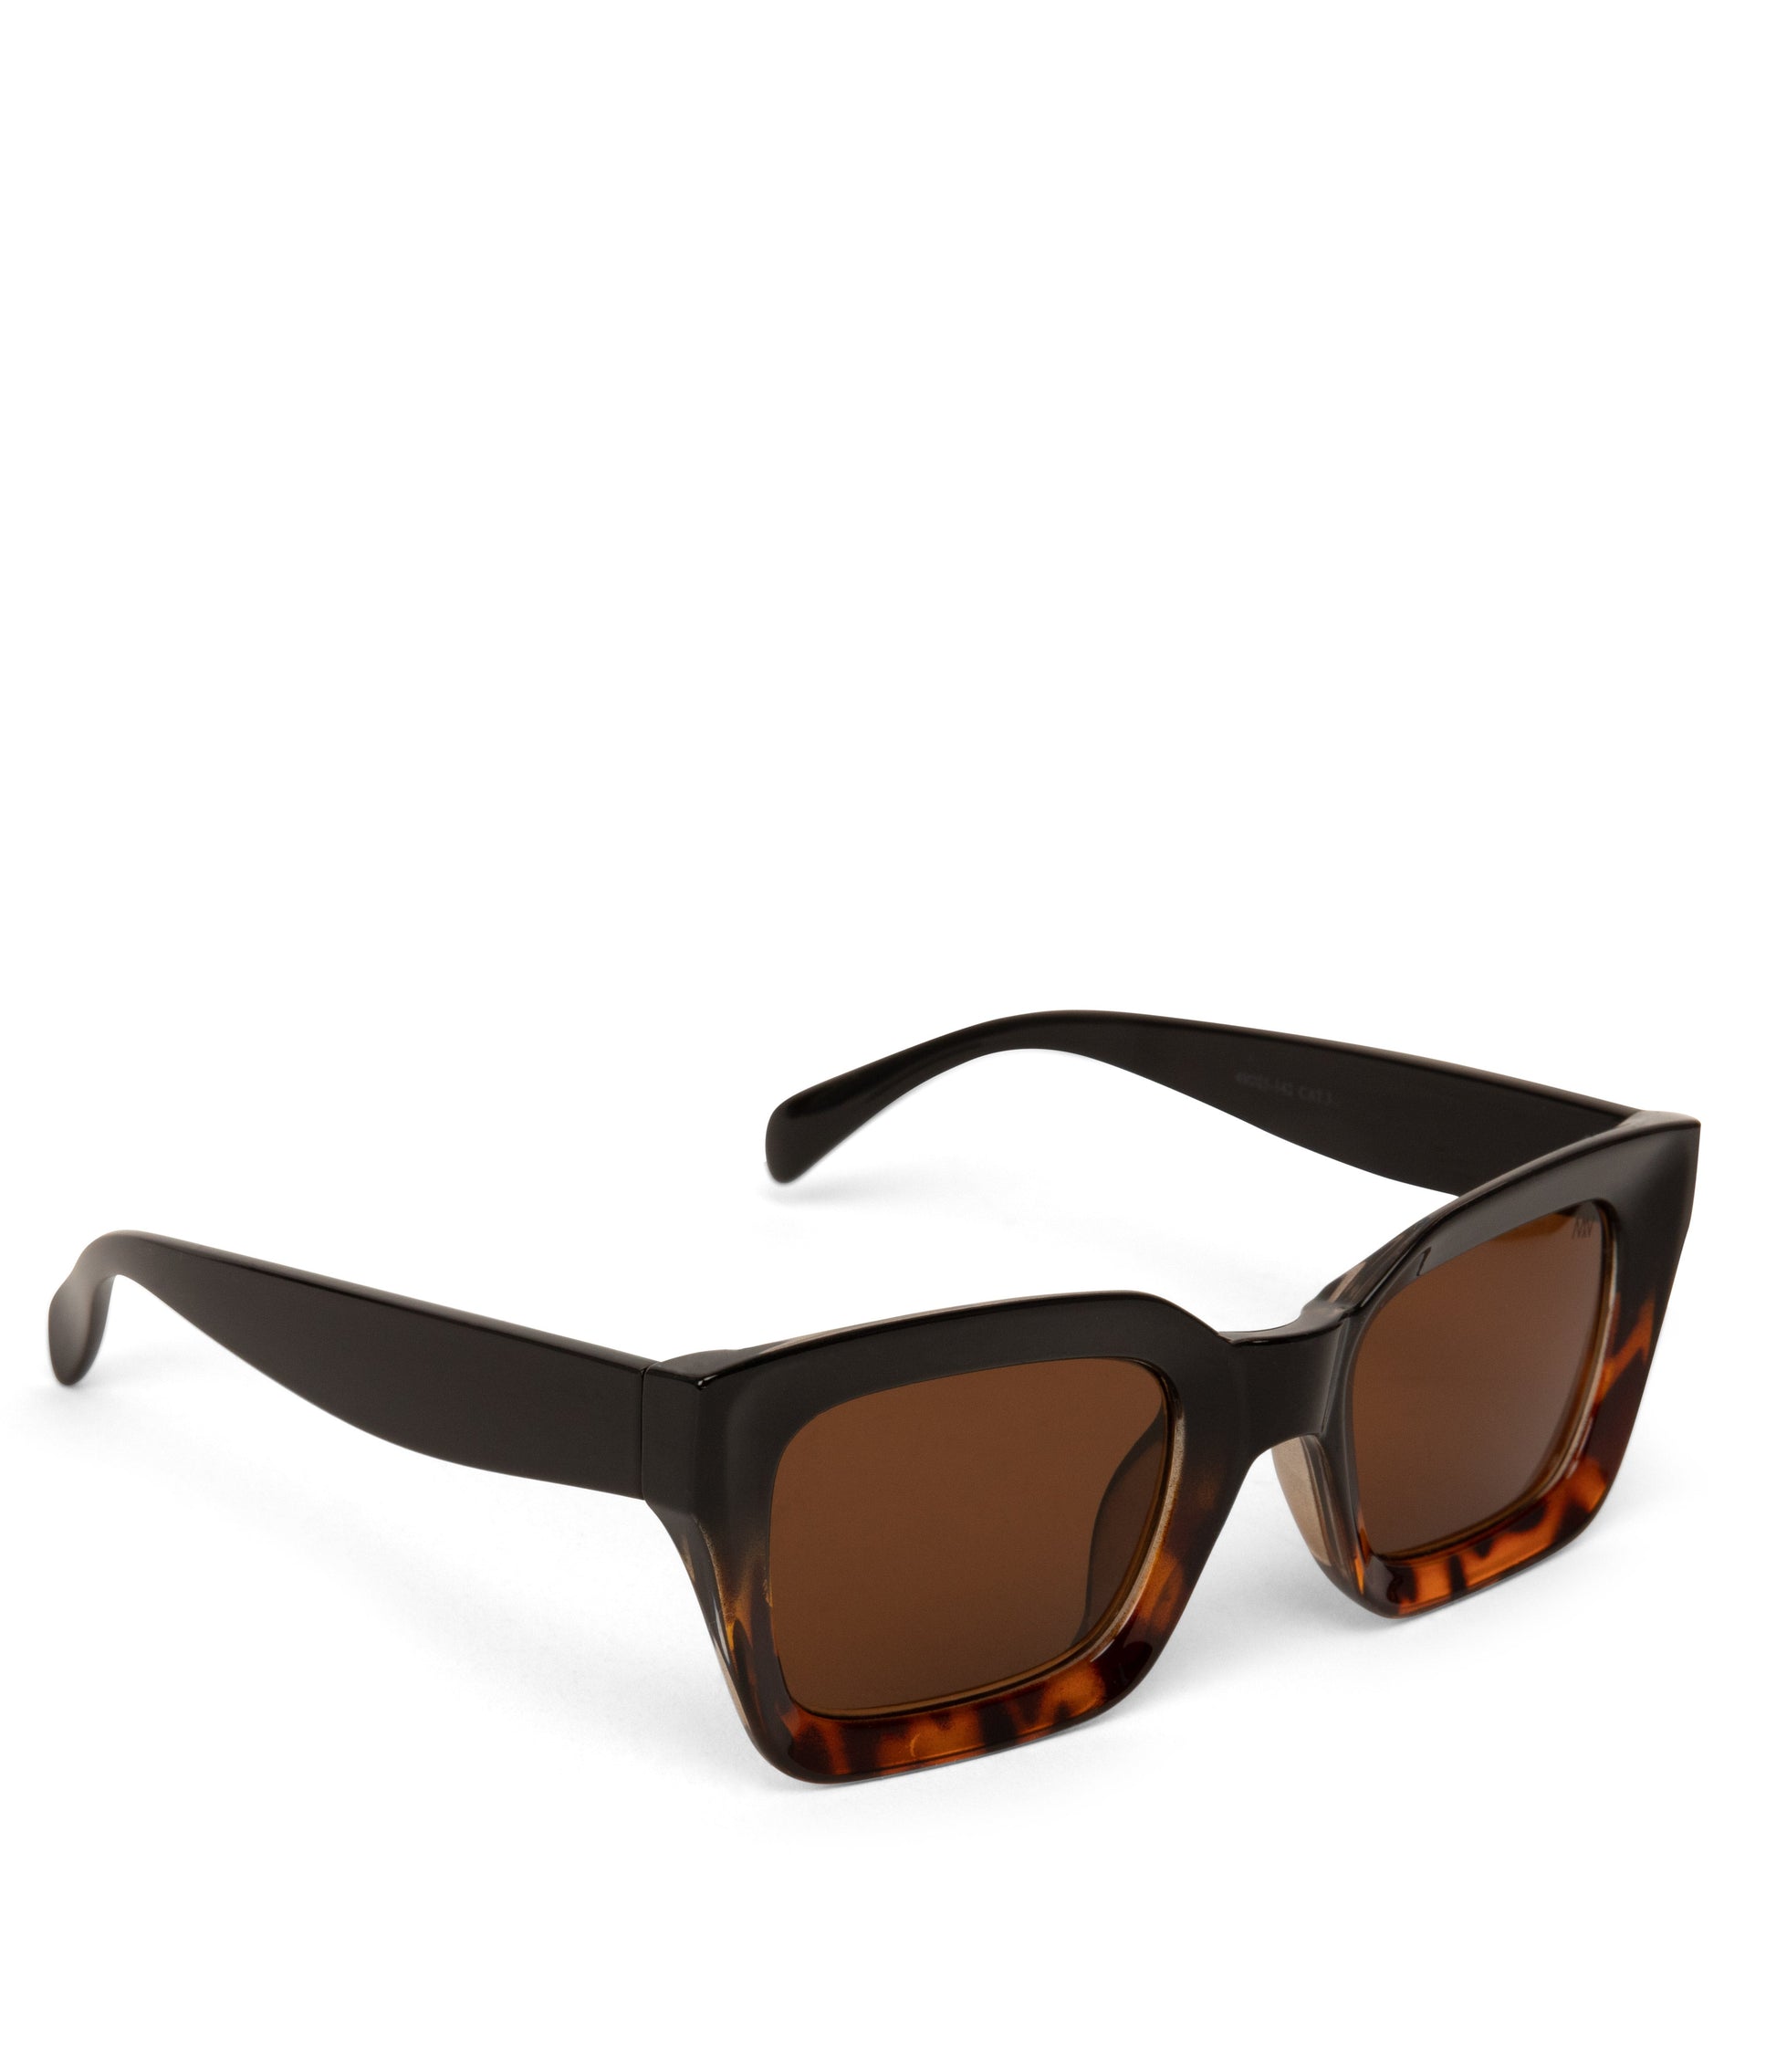 MEHA-2 Recycled Square Sunglasses | Color: Brown - variant::print